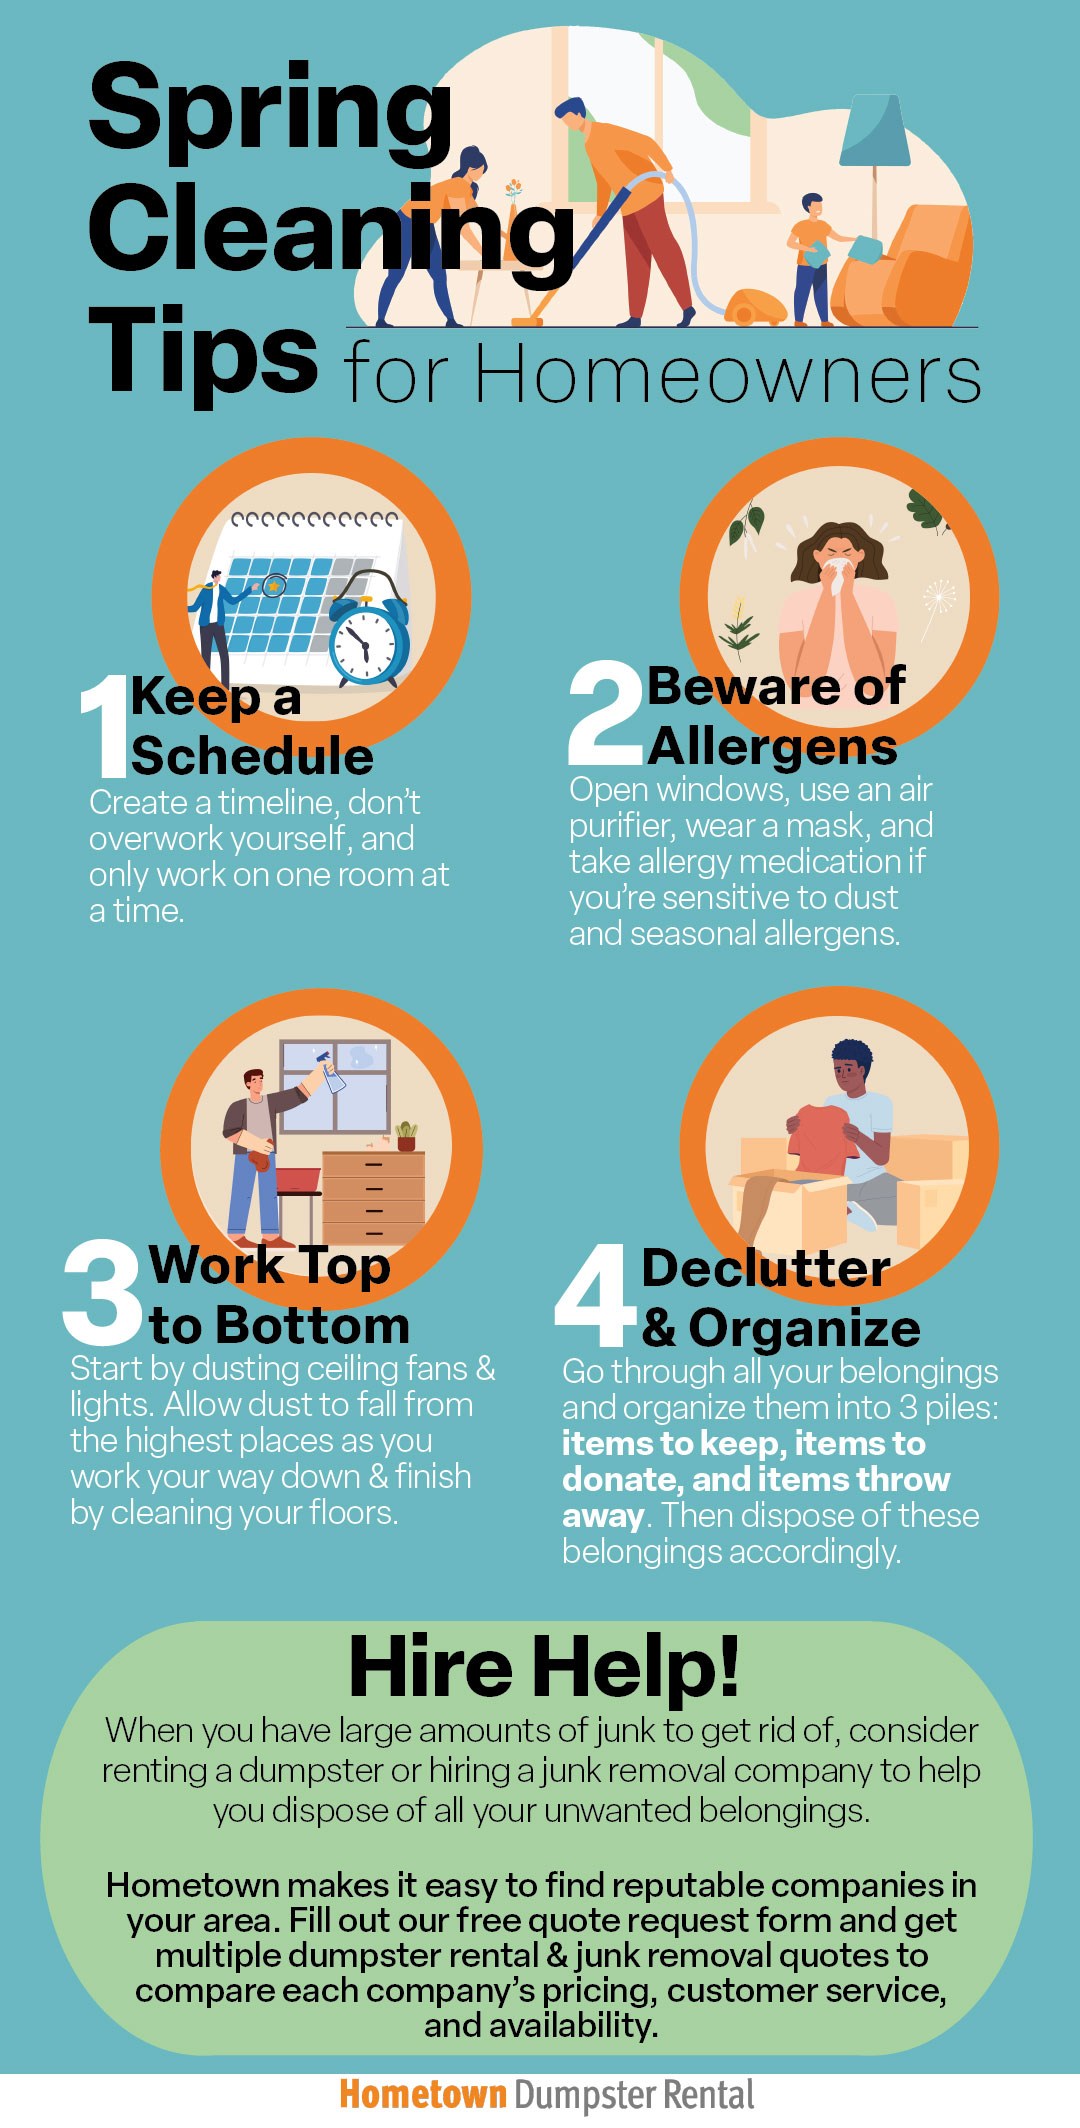 Spring Cleaning Tips for Homeowners Infographic